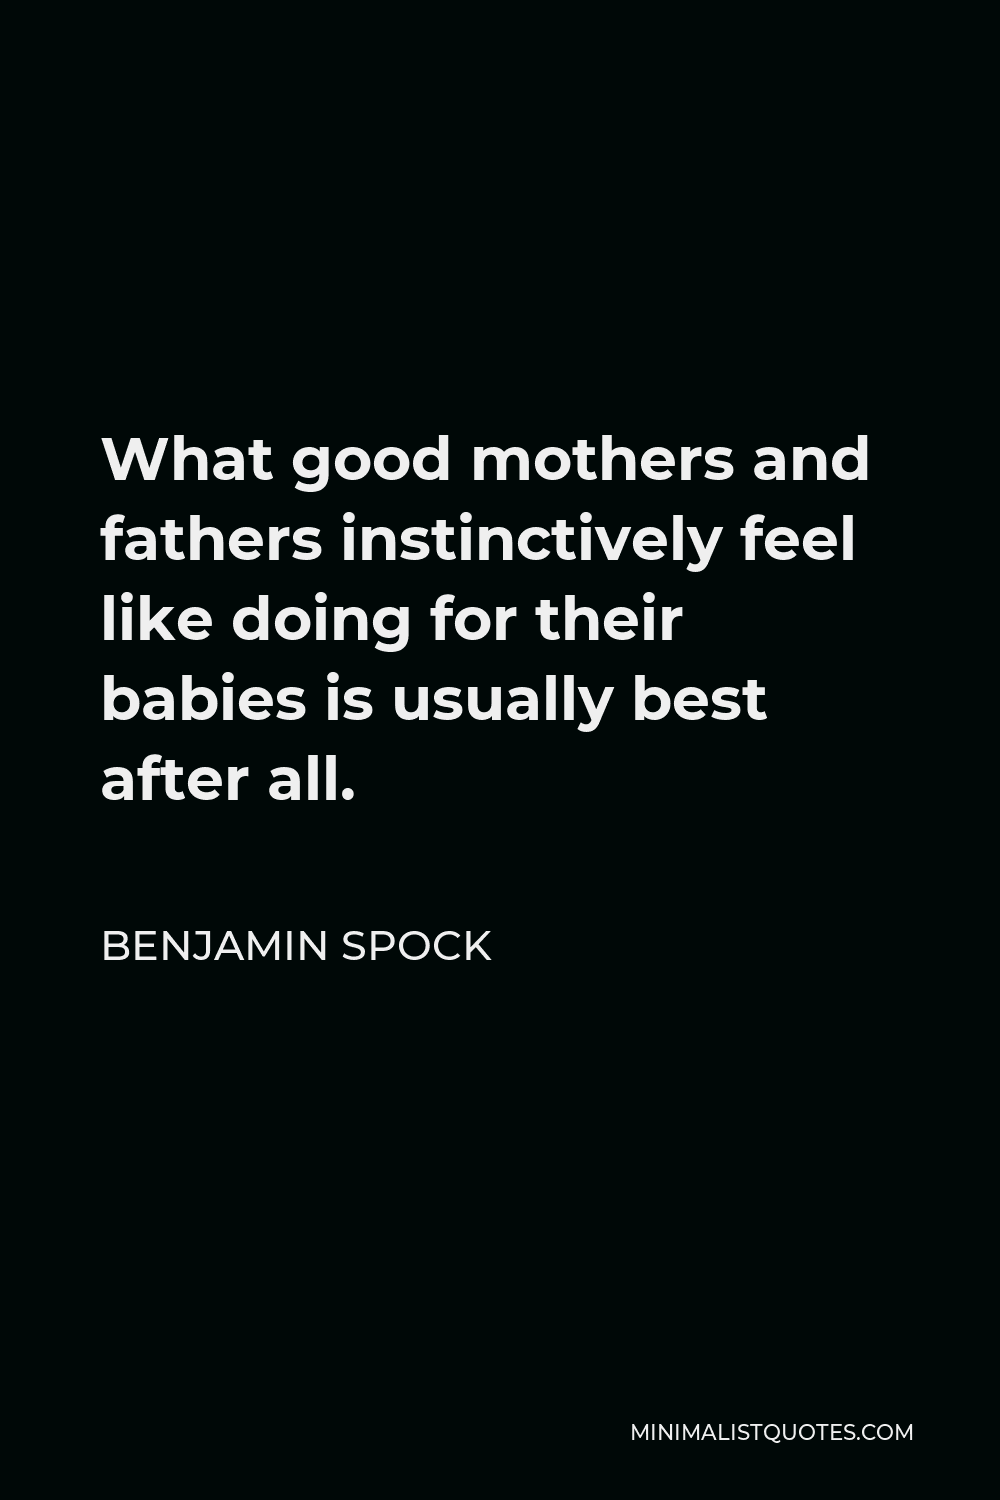 Benjamin Spock Quote - What good mothers and fathers instinctively feel like doing for their babies is usually best after all.